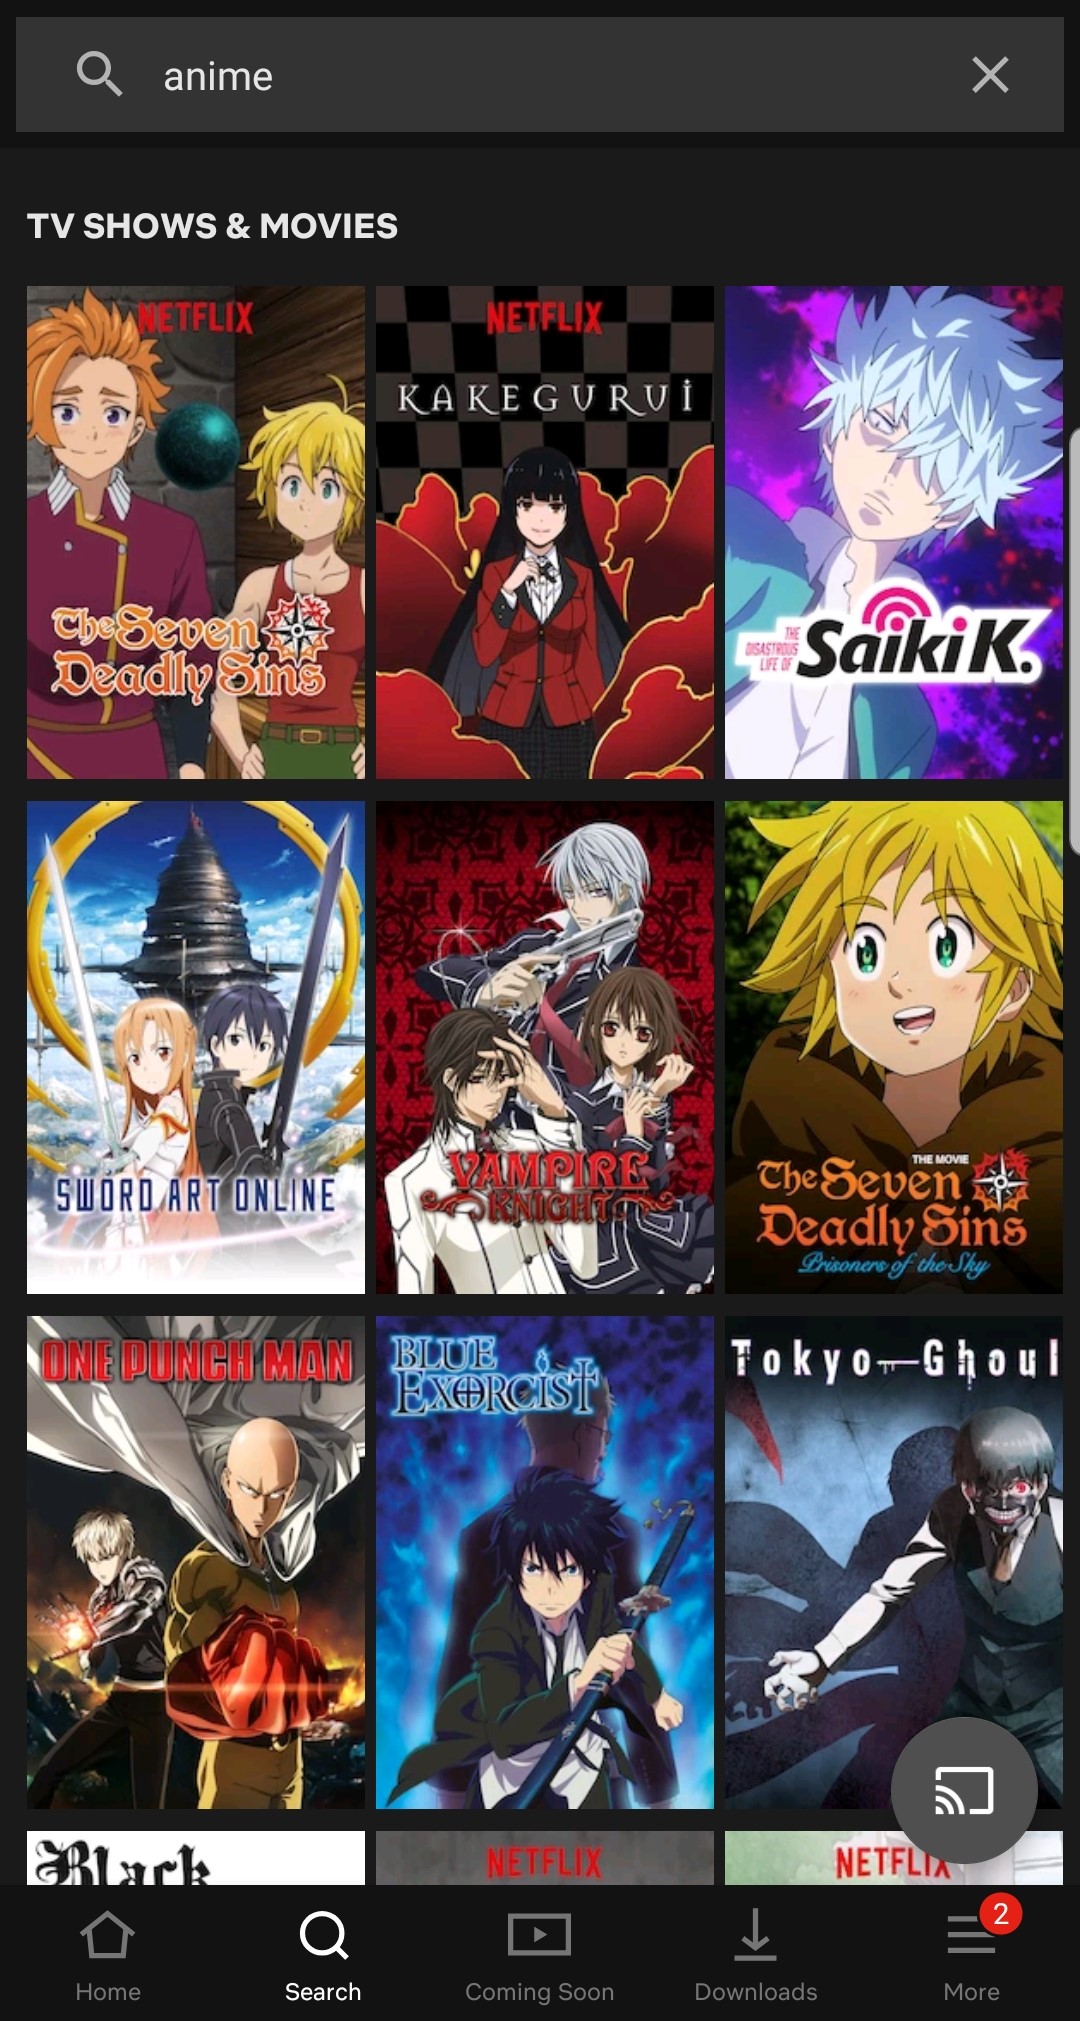 Anime you can watch on Netflix